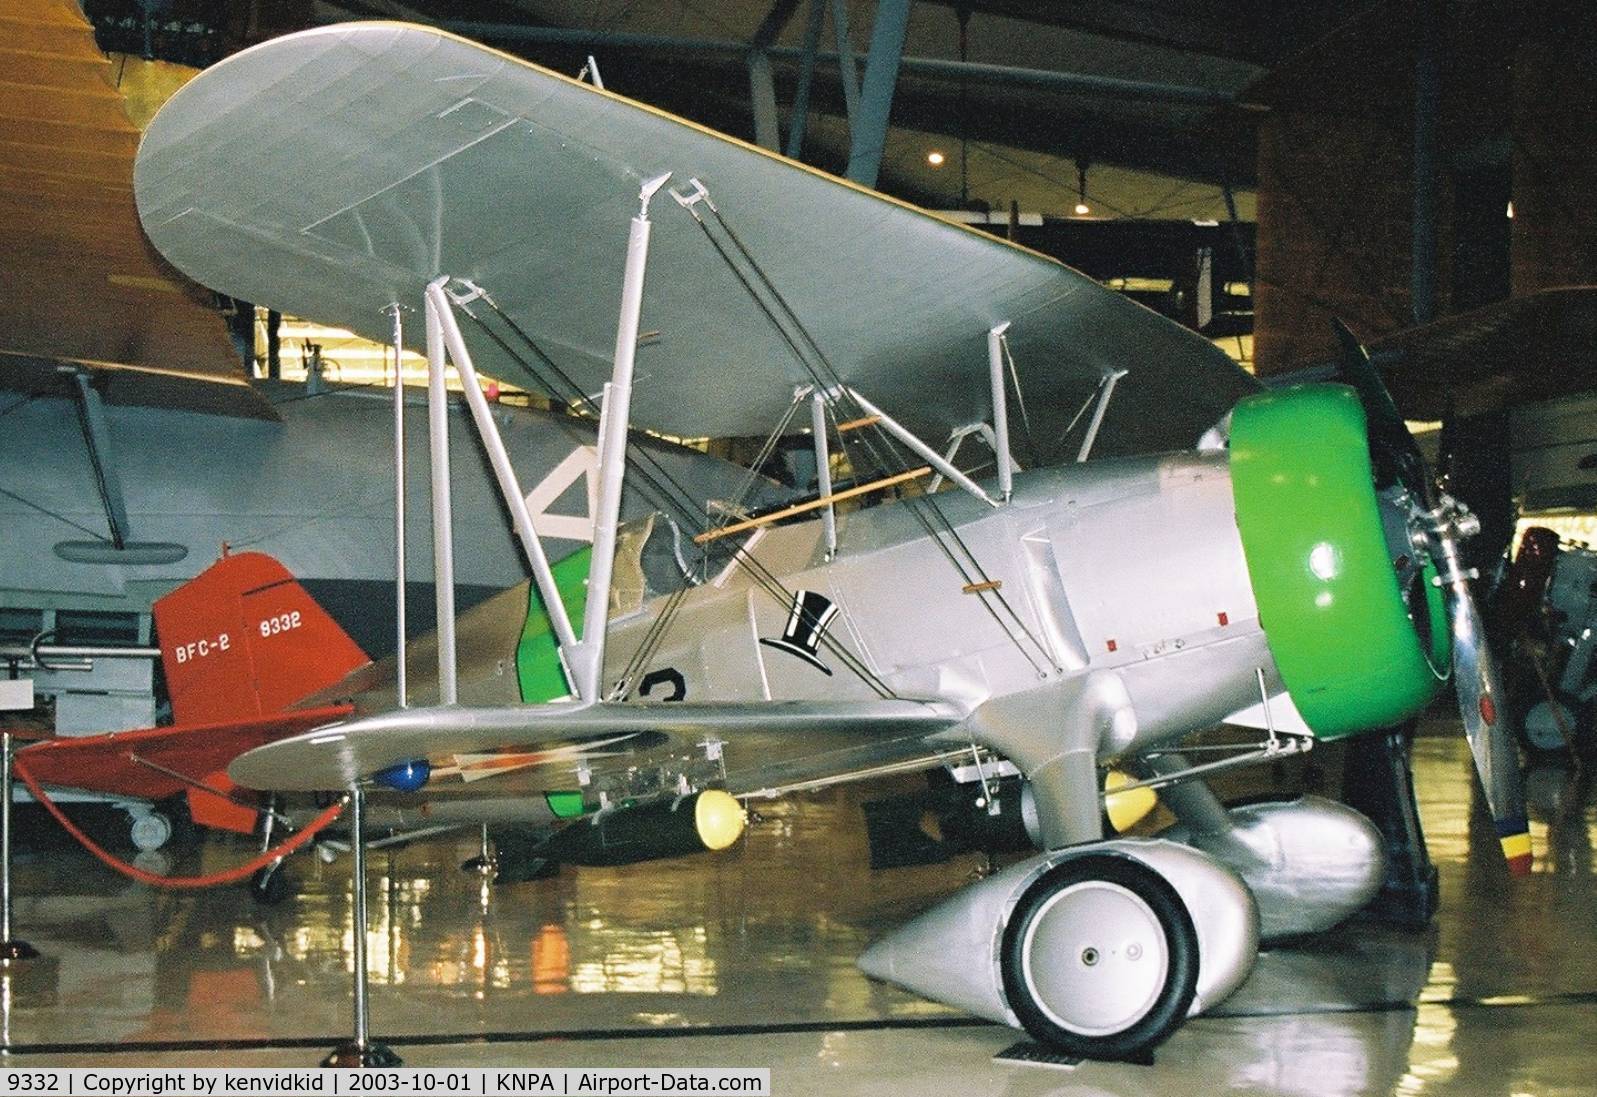 9332, 1937 Curtiss BFC-2 Goshawk C/N Not found 9332, On display at the Museum of Naval Aviation, Pensacola.